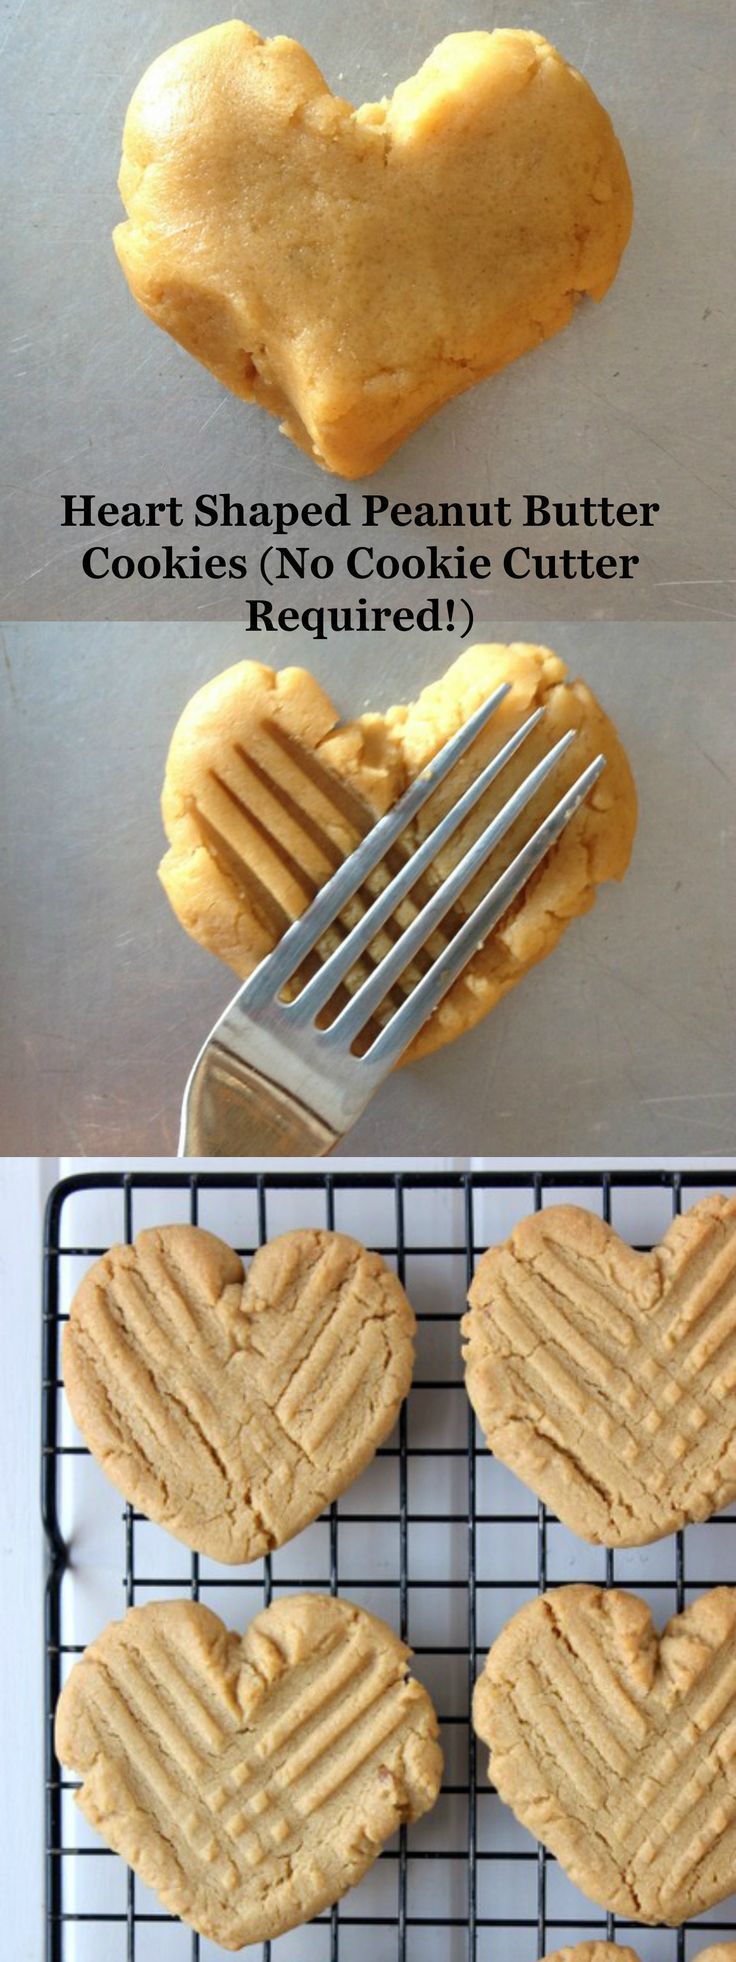 Valentines Day Heart Shaped Peanut Butter Cookies! No Cookie Cutter Required!